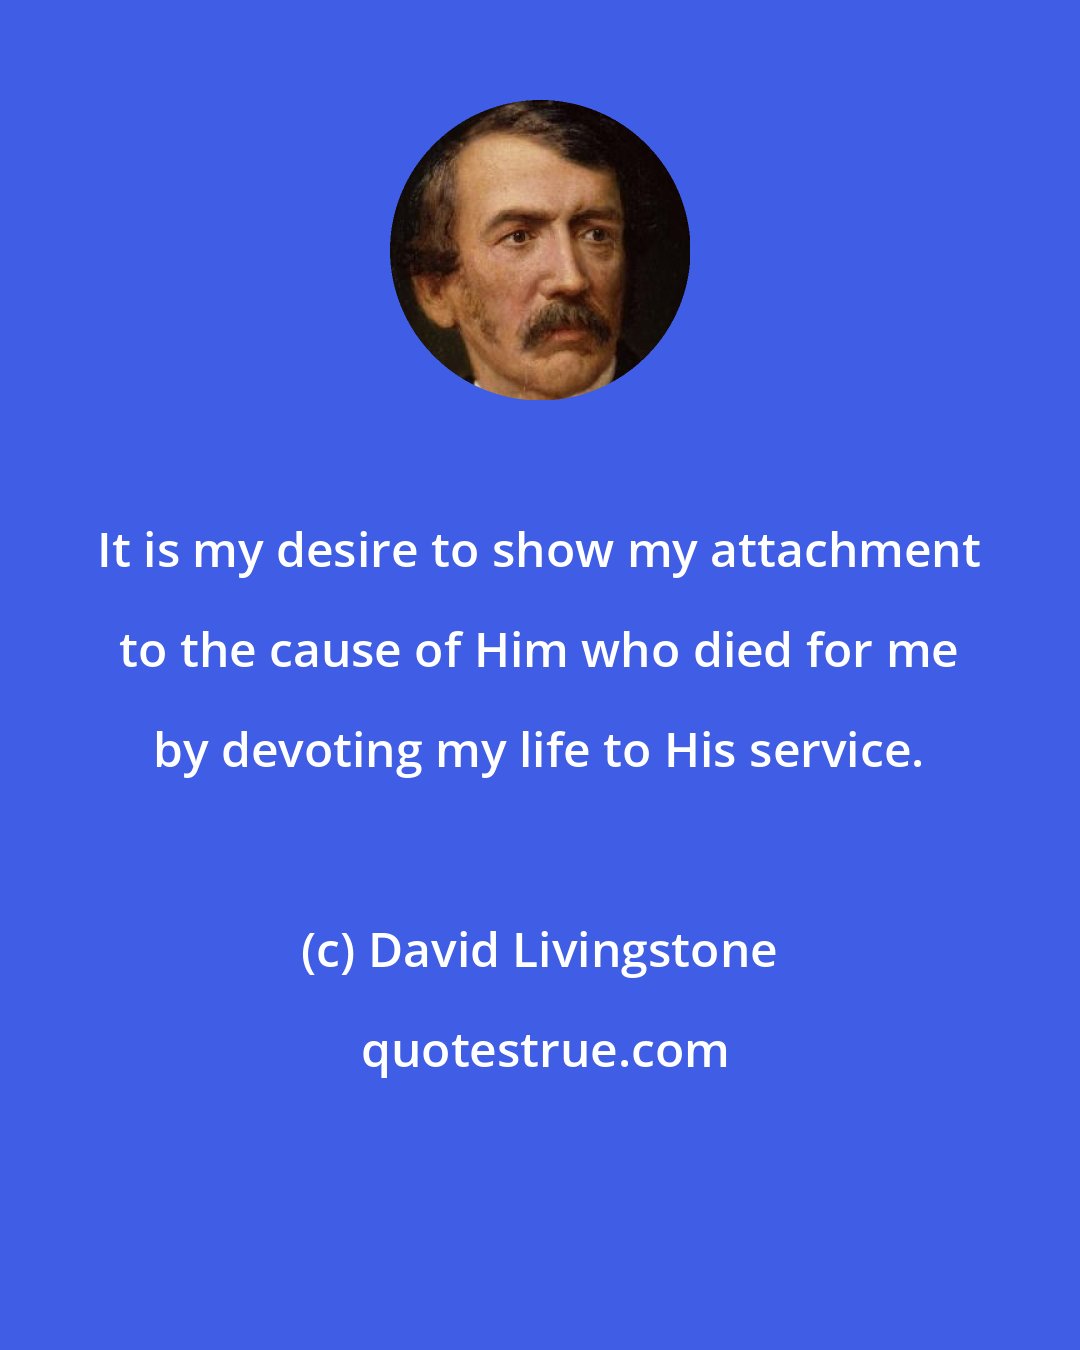 David Livingstone: It is my desire to show my attachment to the cause of Him who died for me by devoting my life to His service.